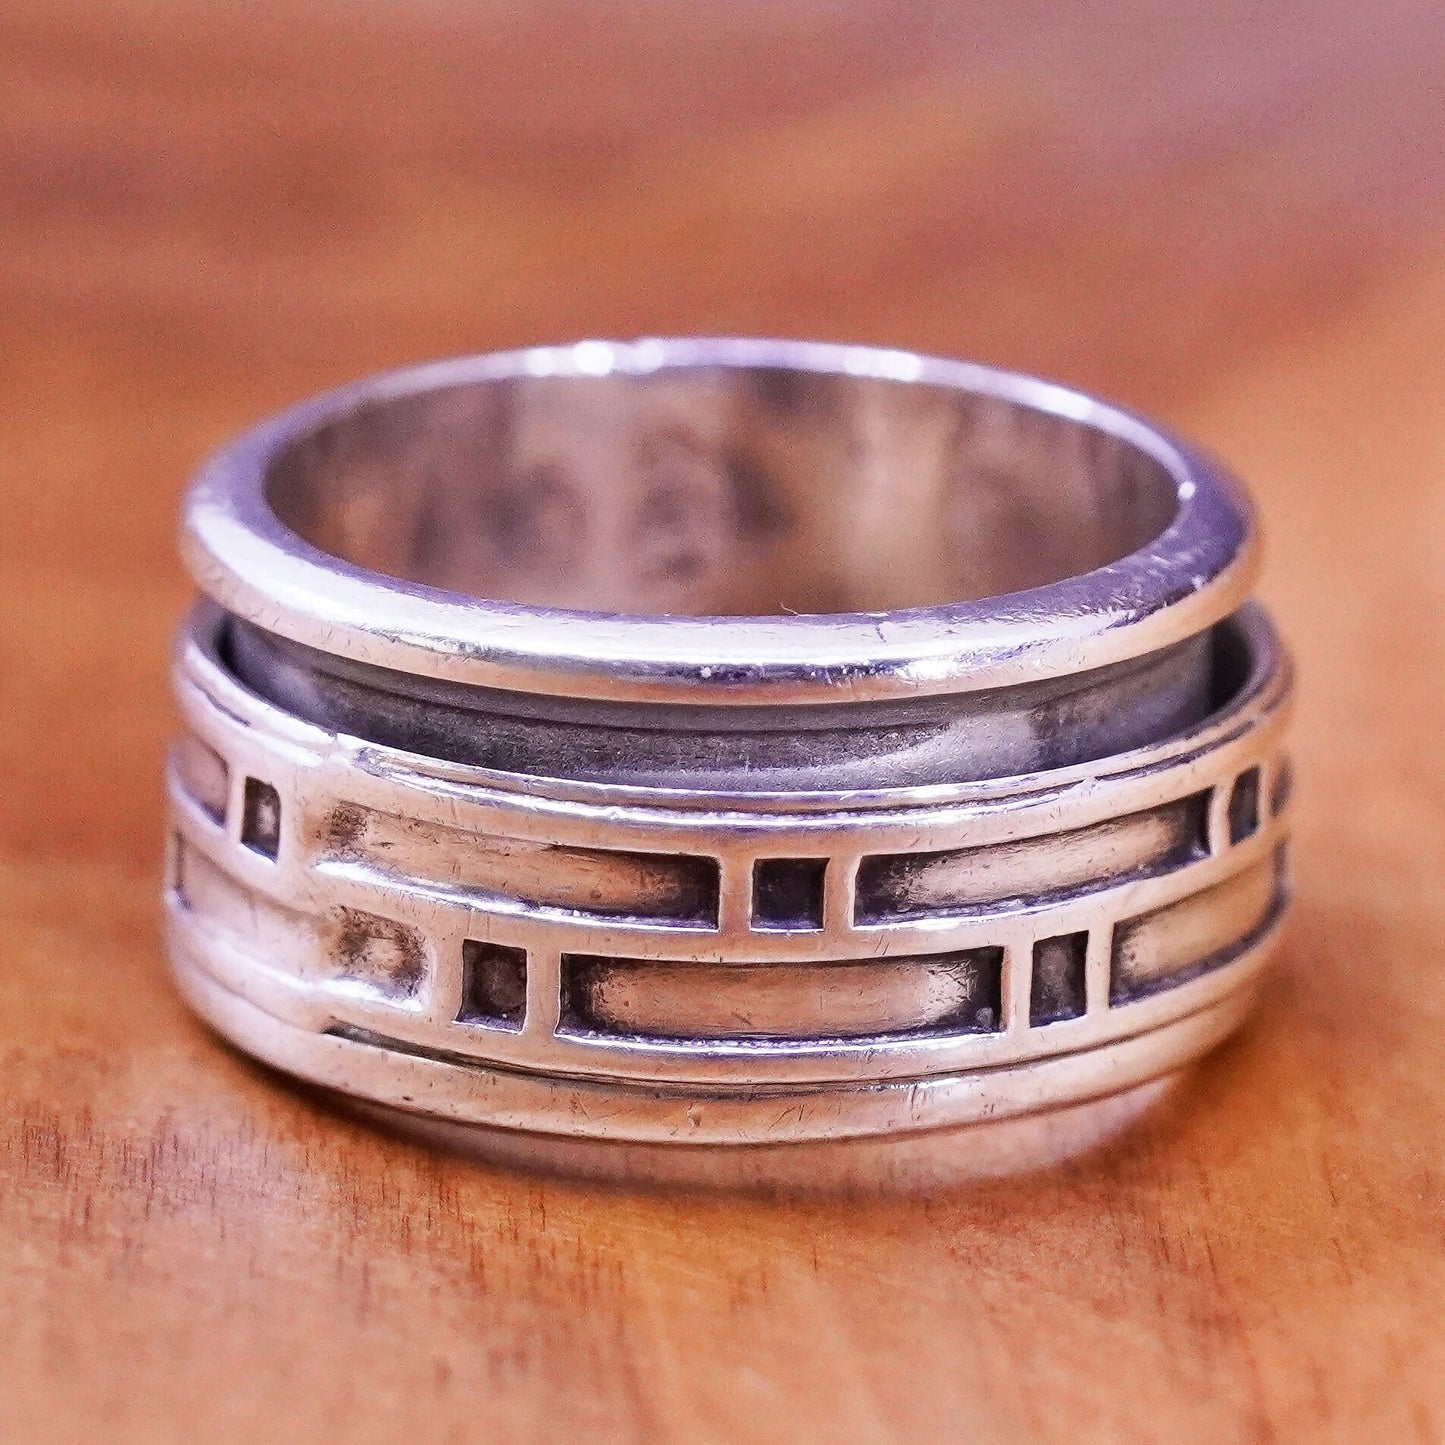 Size 6.25, vintage Sterling silver prayer ring, 925 textured spinner band